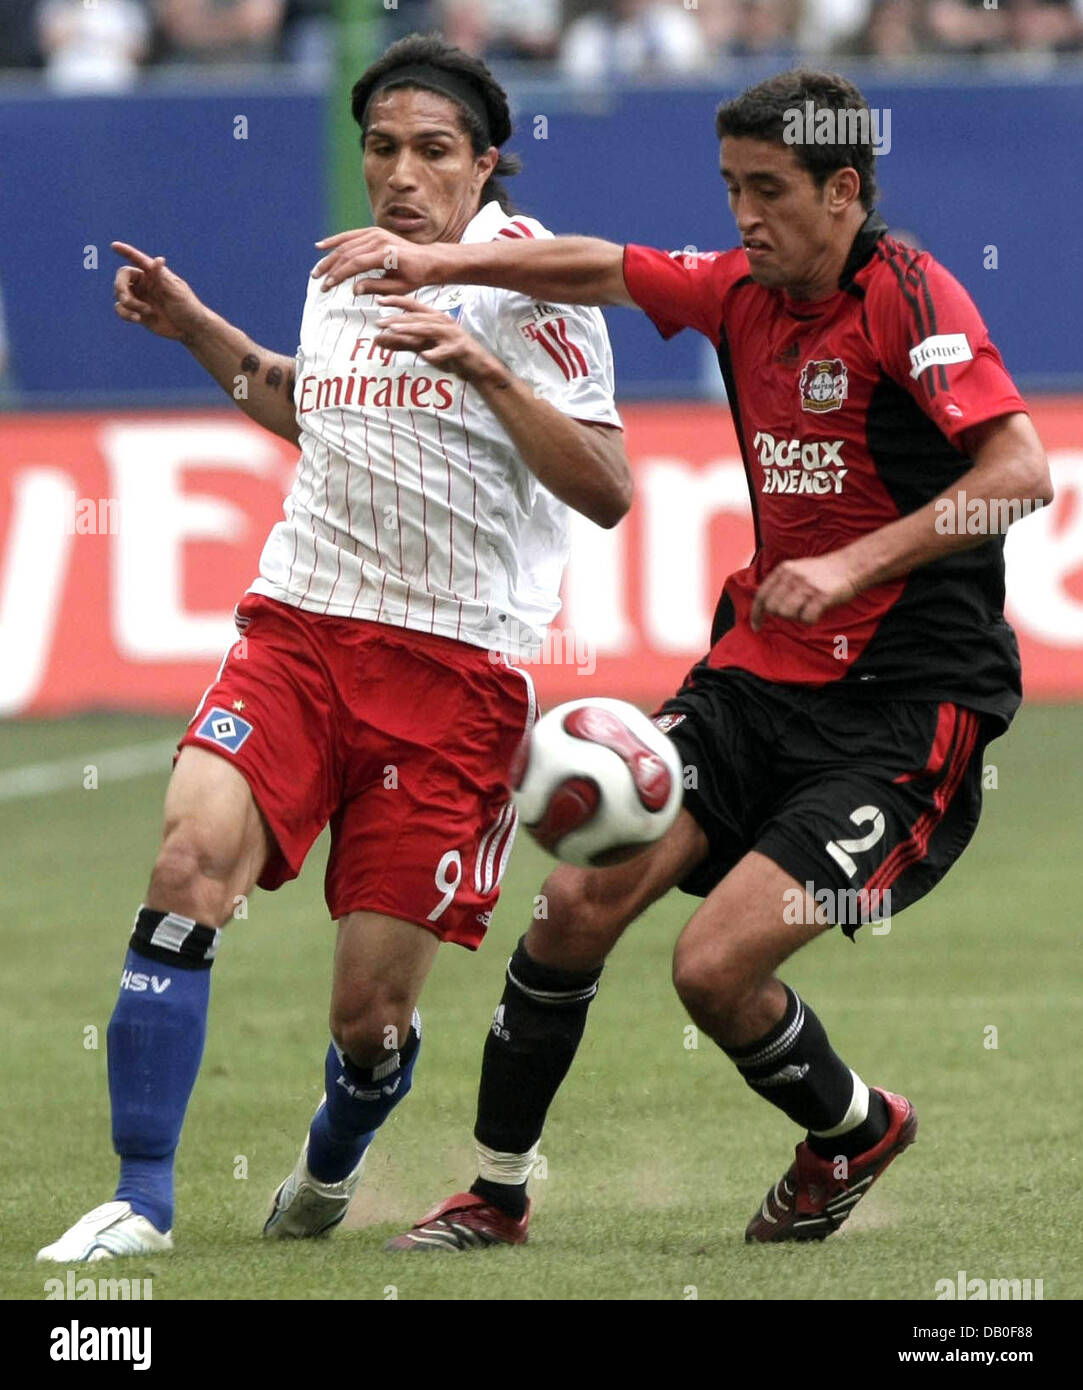 Hamburg's Jose Paolo Guerrero (L) vies for the ball with Karim Haggui of Bayer Leverkusen during the Hamburg vs Bayer Leverkusen match in Hamburg, Germany, 19 August 2007. Hamburg won the match 1-0. Foto: Ulrich Perrey Stock Photo